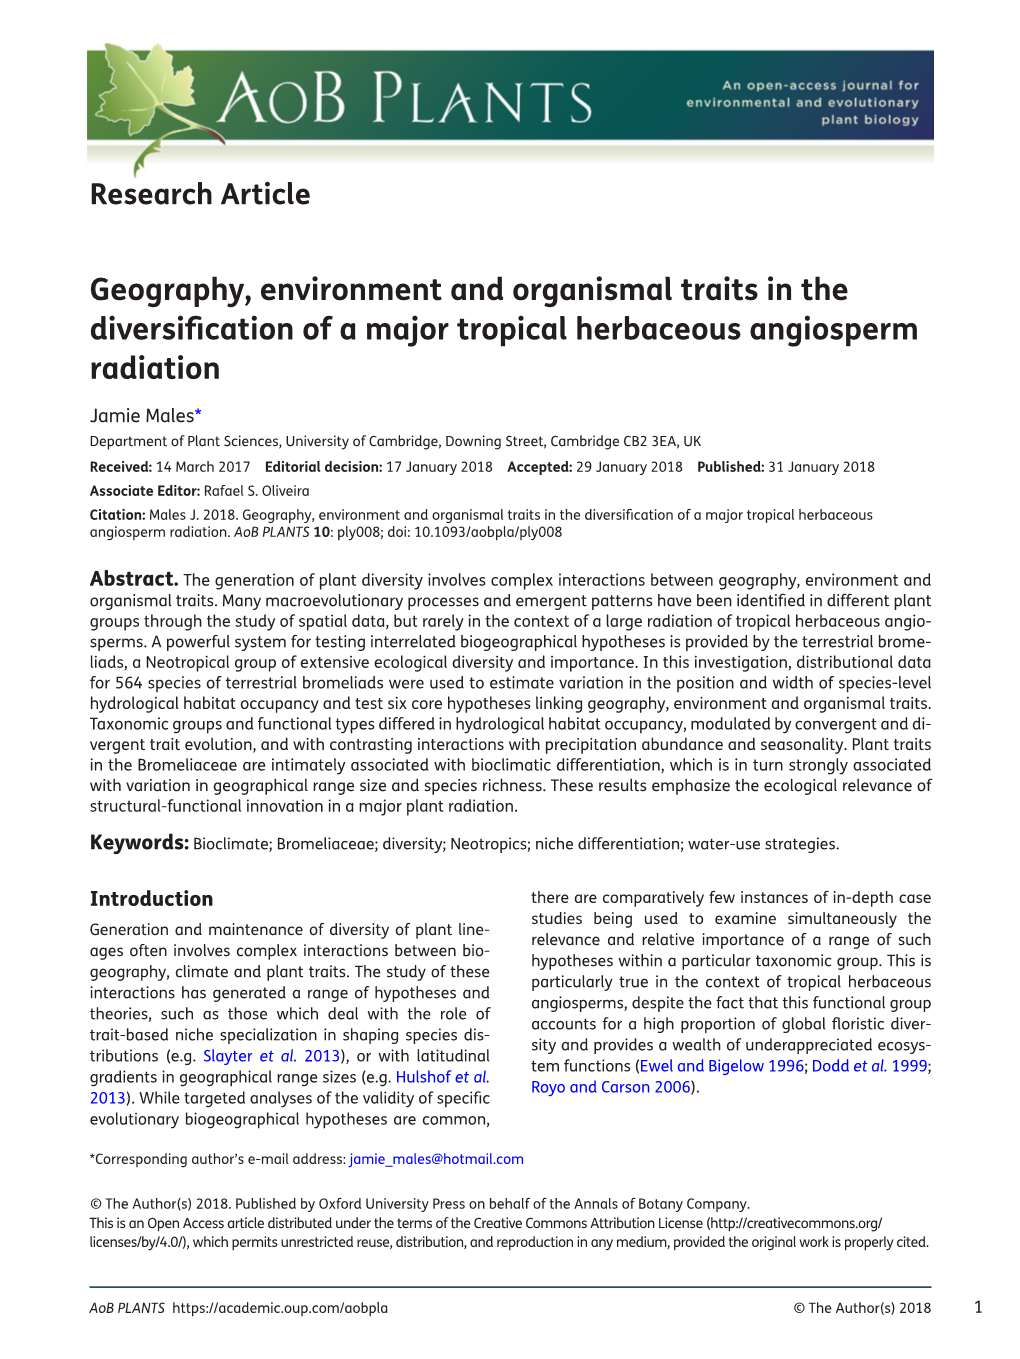 Geography, Environment and Organismal Traits in the Diversification of a Major Tropical Herbaceous Angiosperm Radiation